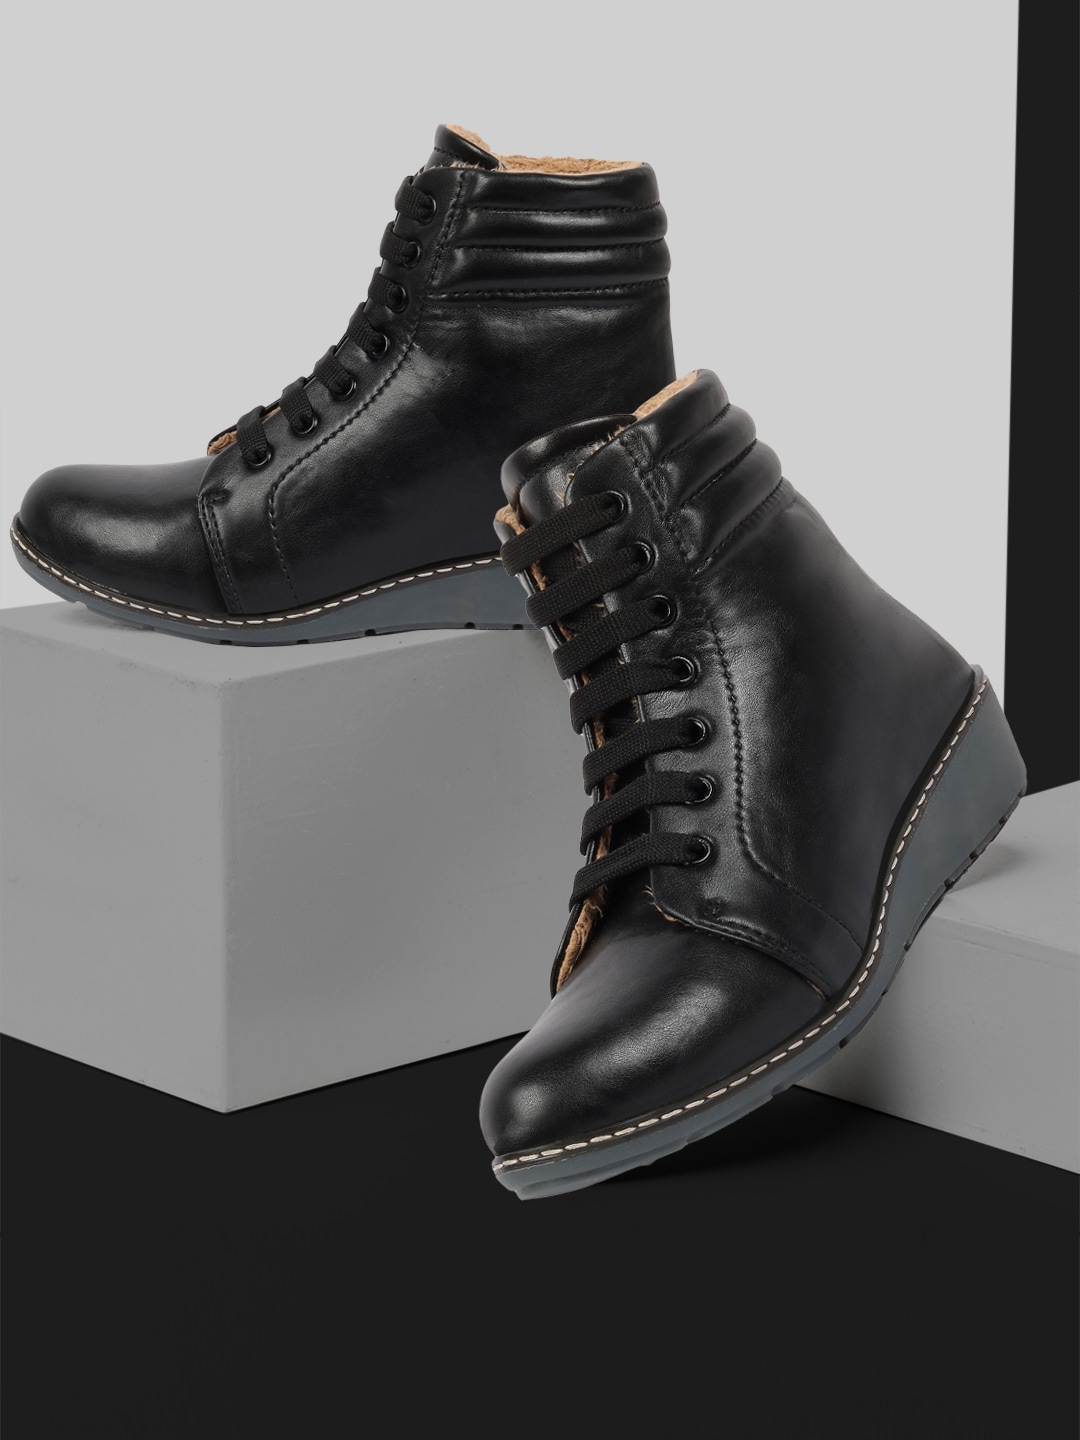 ZAPATOZ Women Black Mid-Top Heeled Boots Price in India